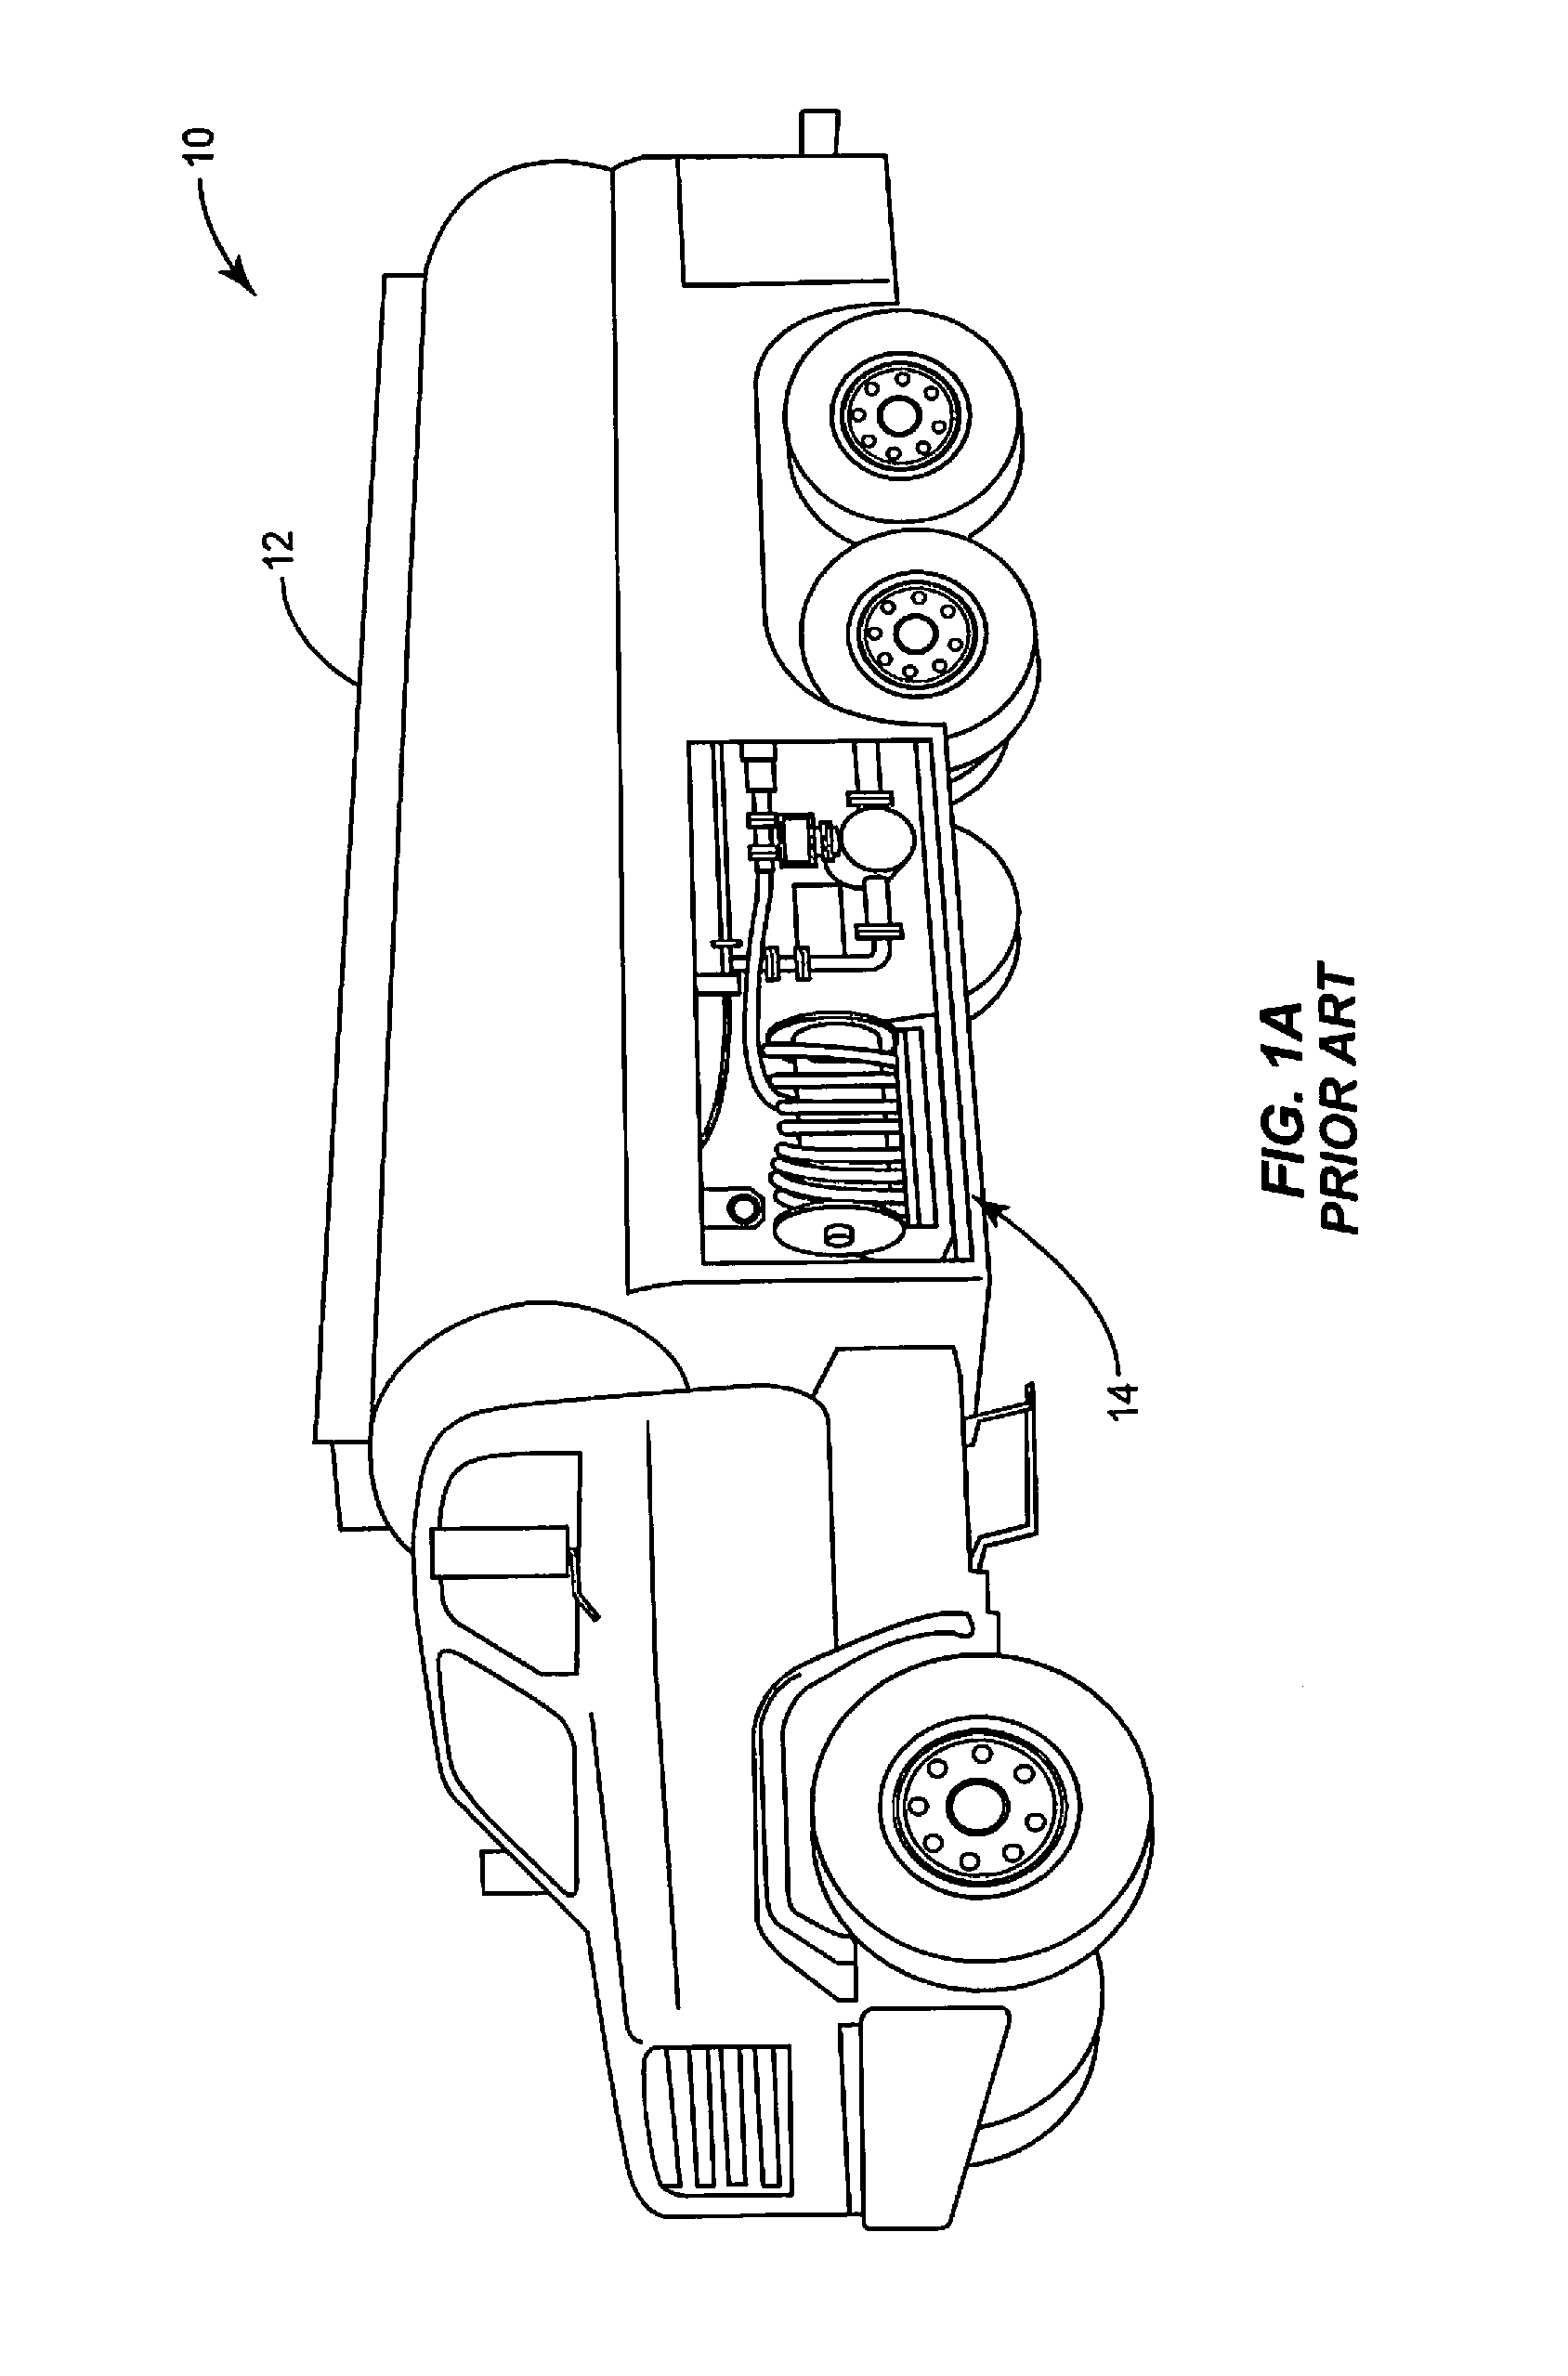 Apparatuses and methods for providing visual indication of dynamic process fuel quality delivery conditions with use of multiple colored indicator lights